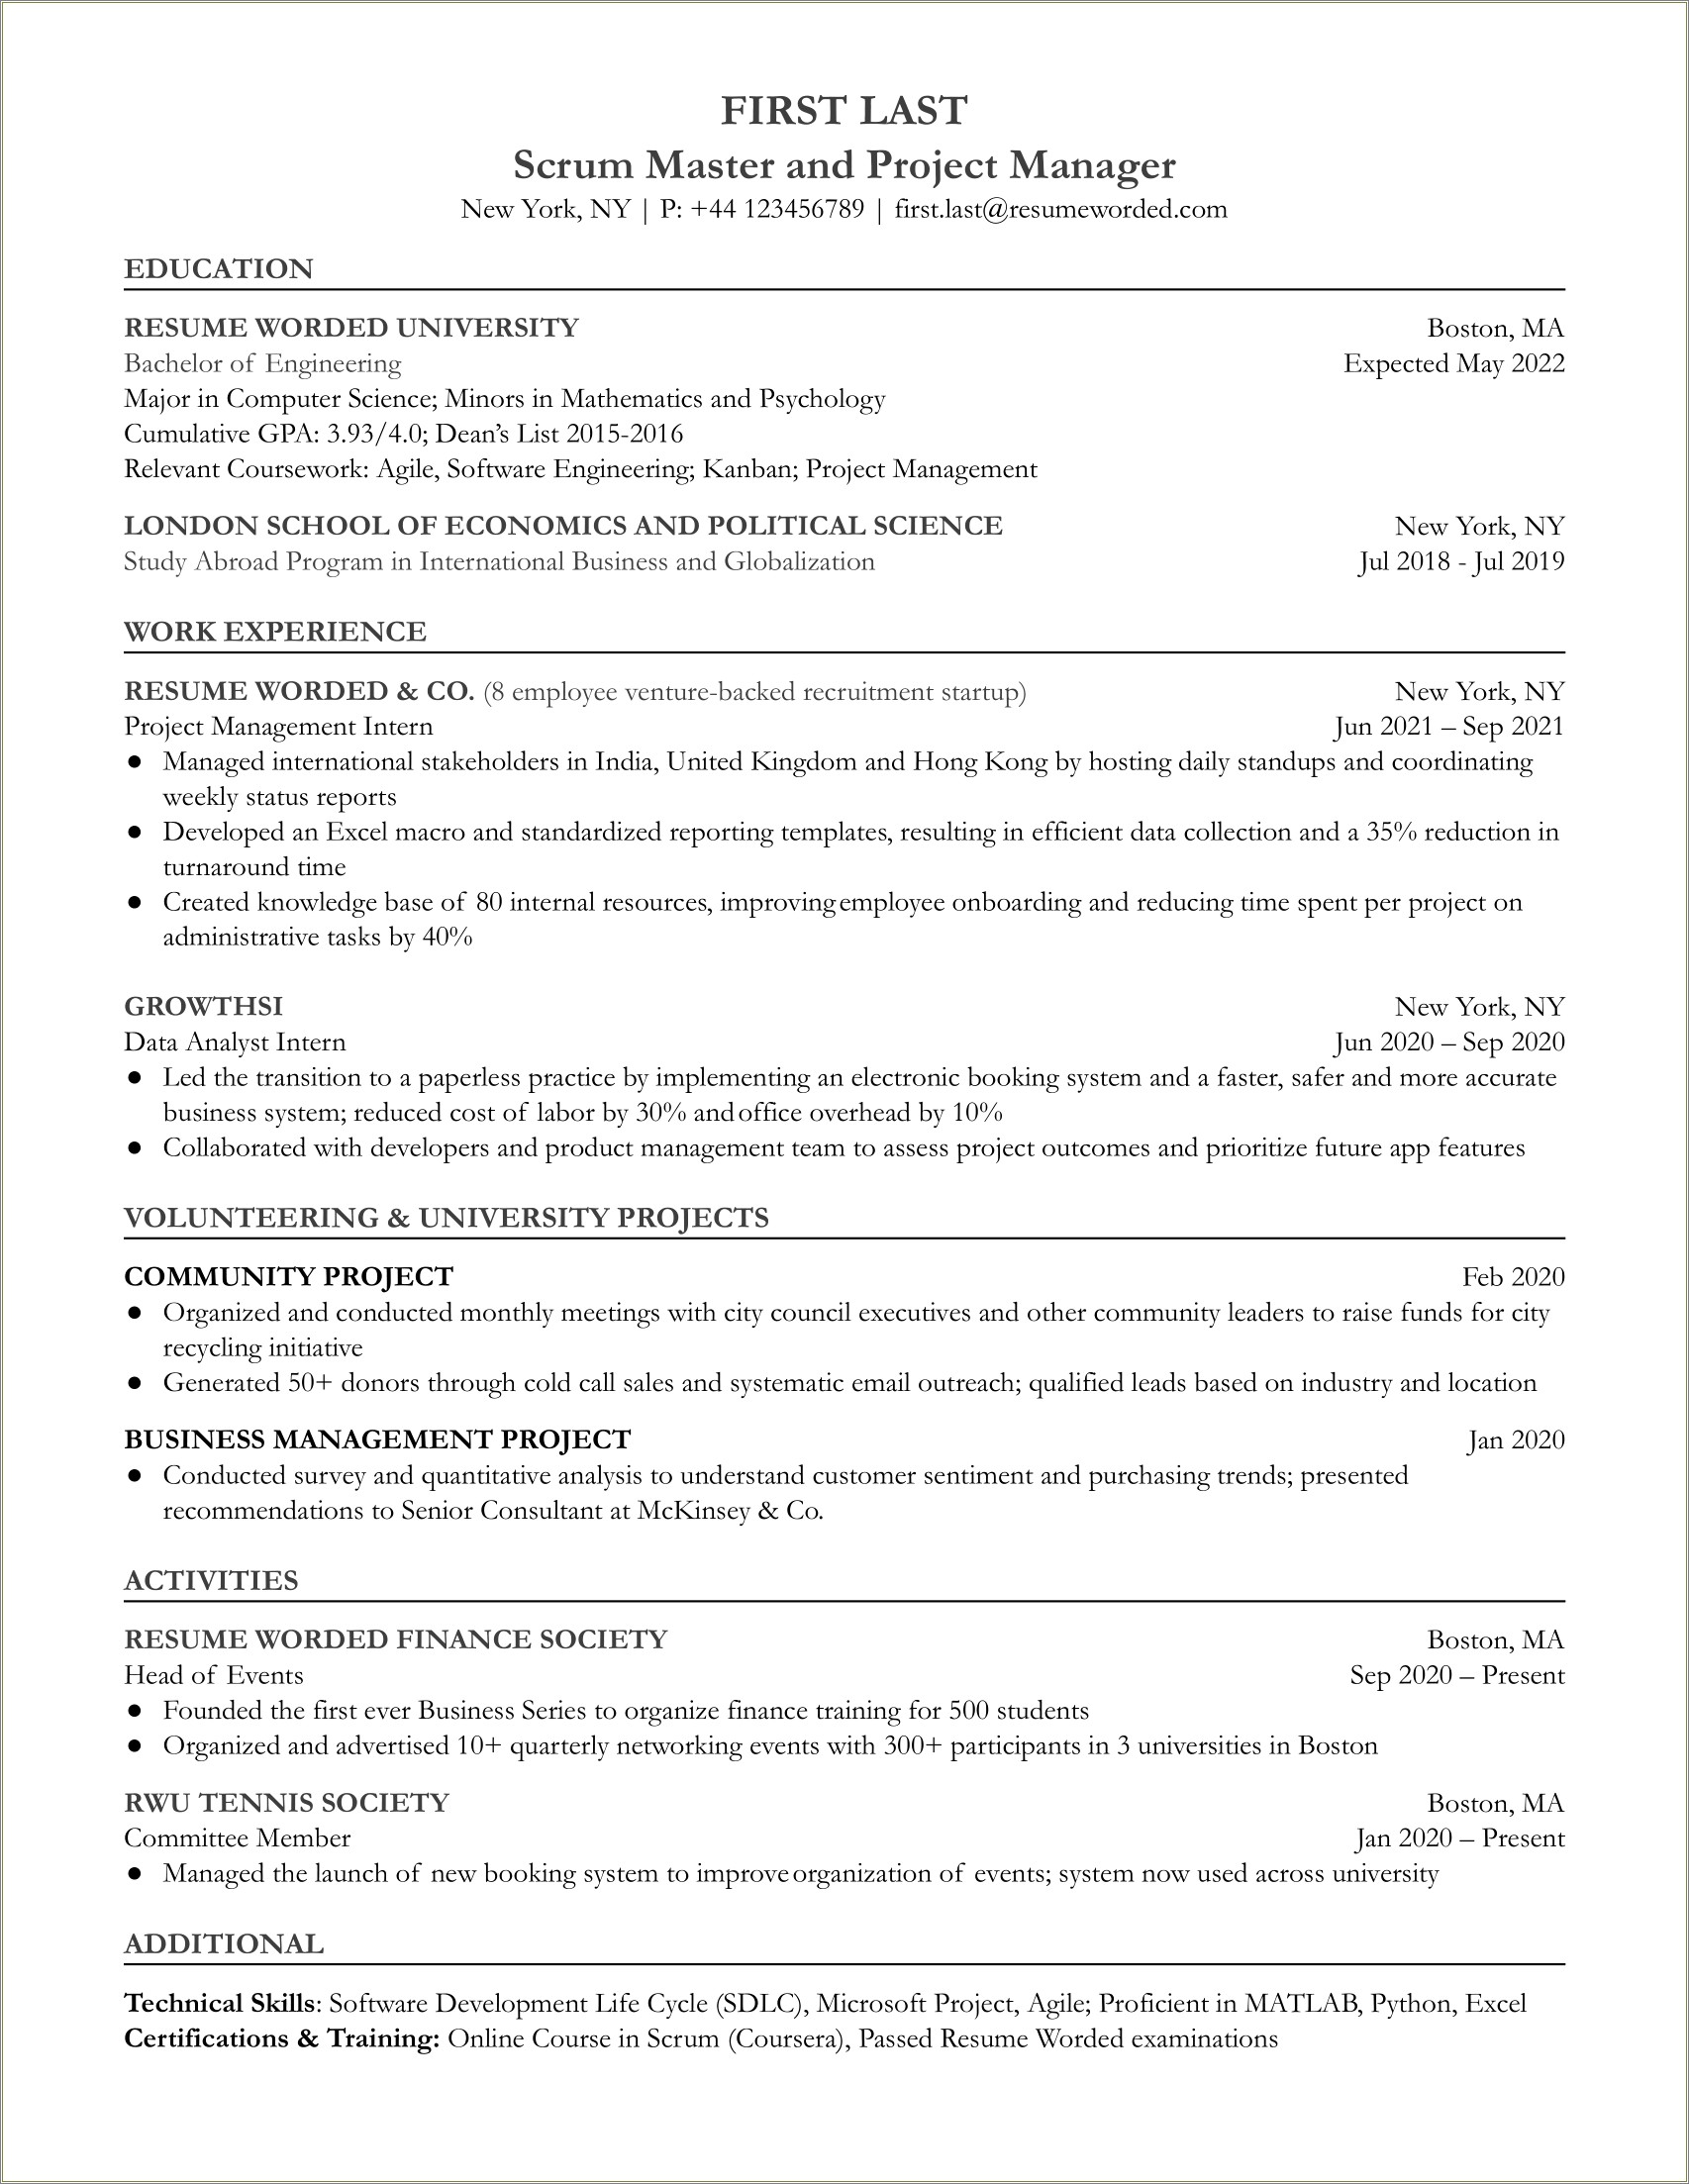 Resume Objective Statement Examples For Entry Level